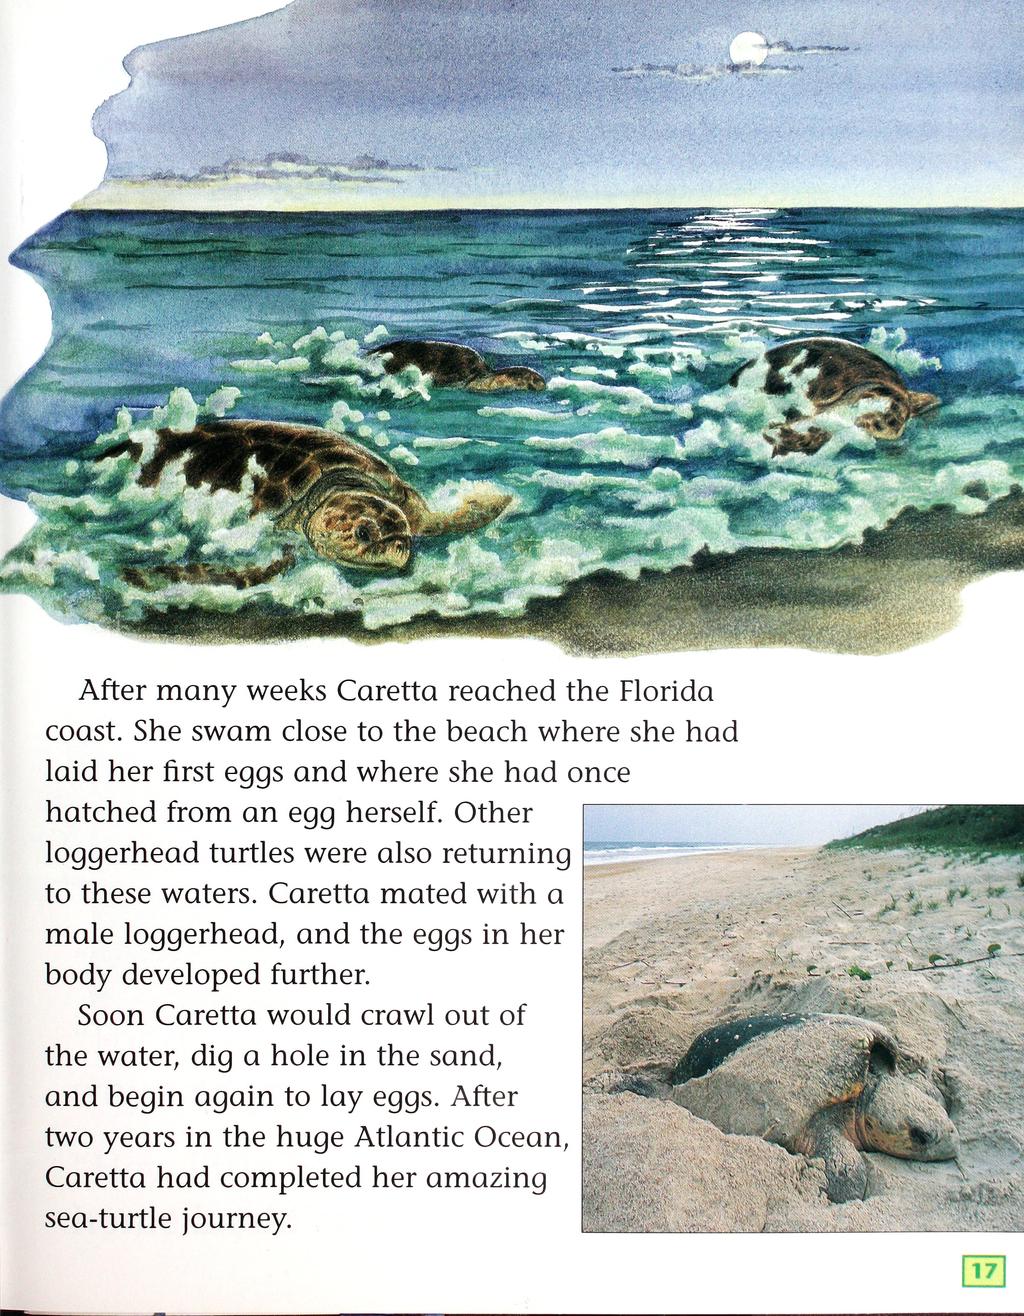 After m any weeks Caretta reached the Florida coast. She swam close to the beach where she had laid her first eggs and where she had once hatched from an egg herself.